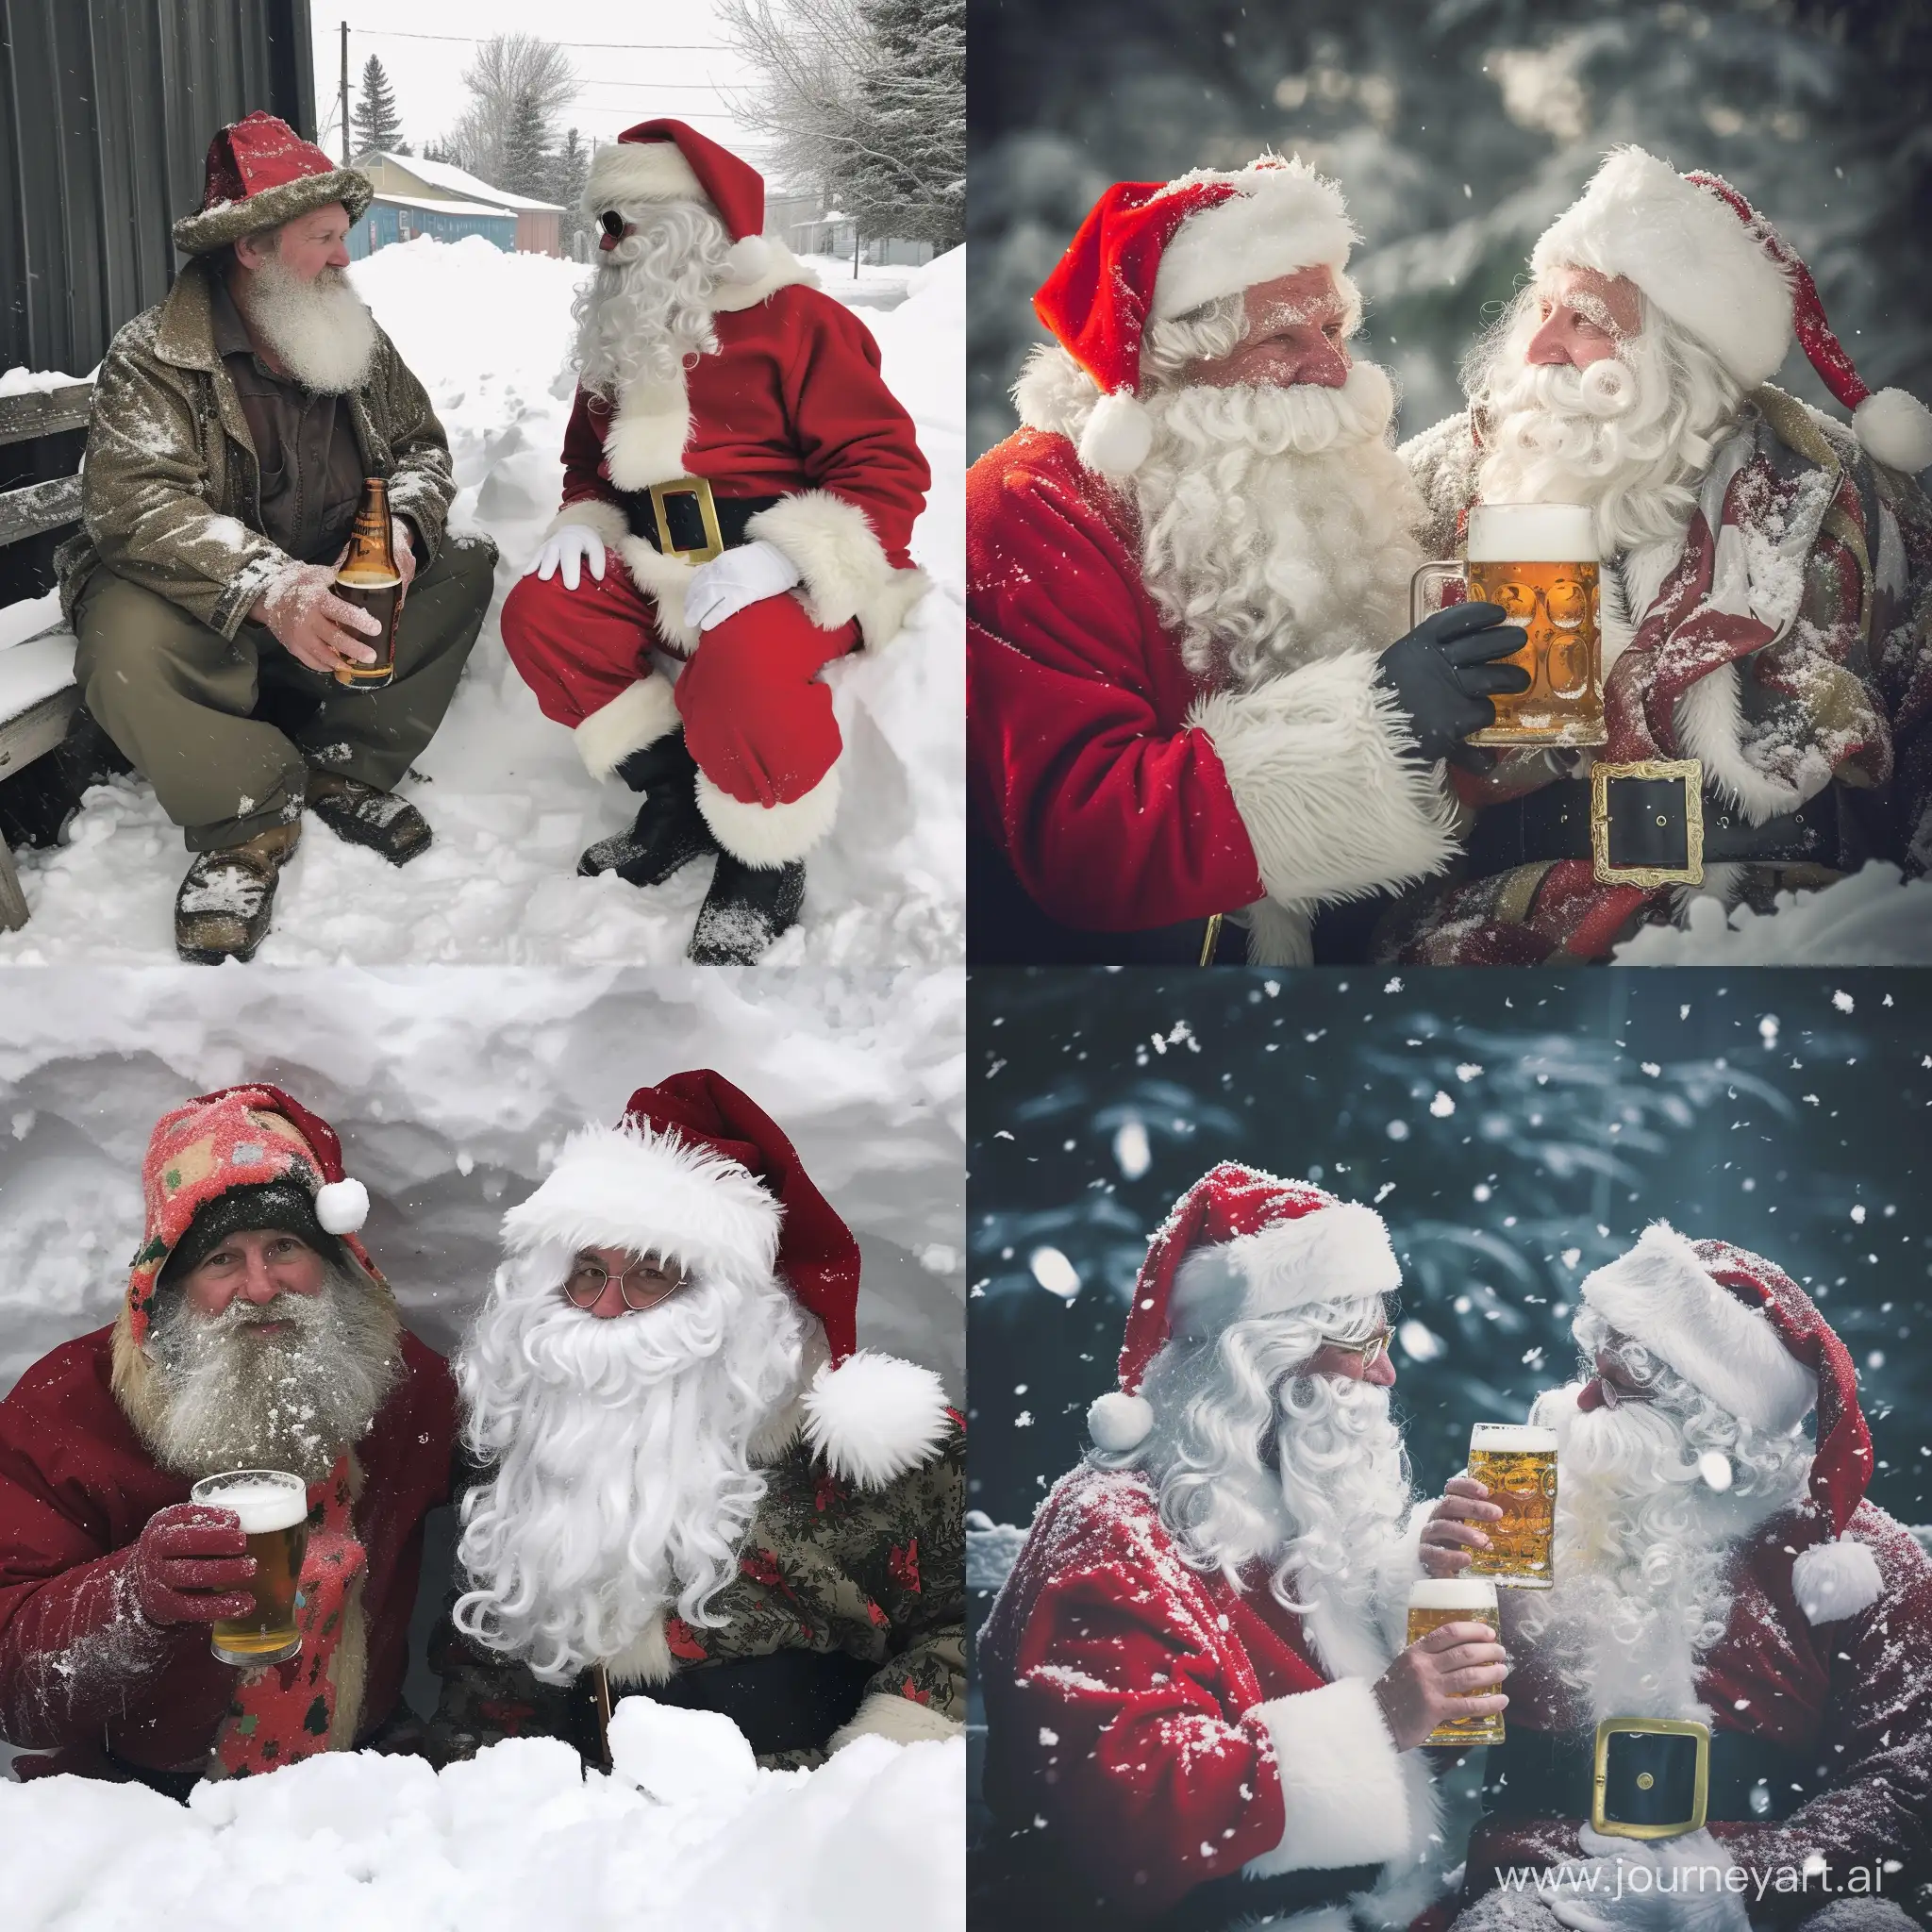 snow shite drinking beer with santa claus